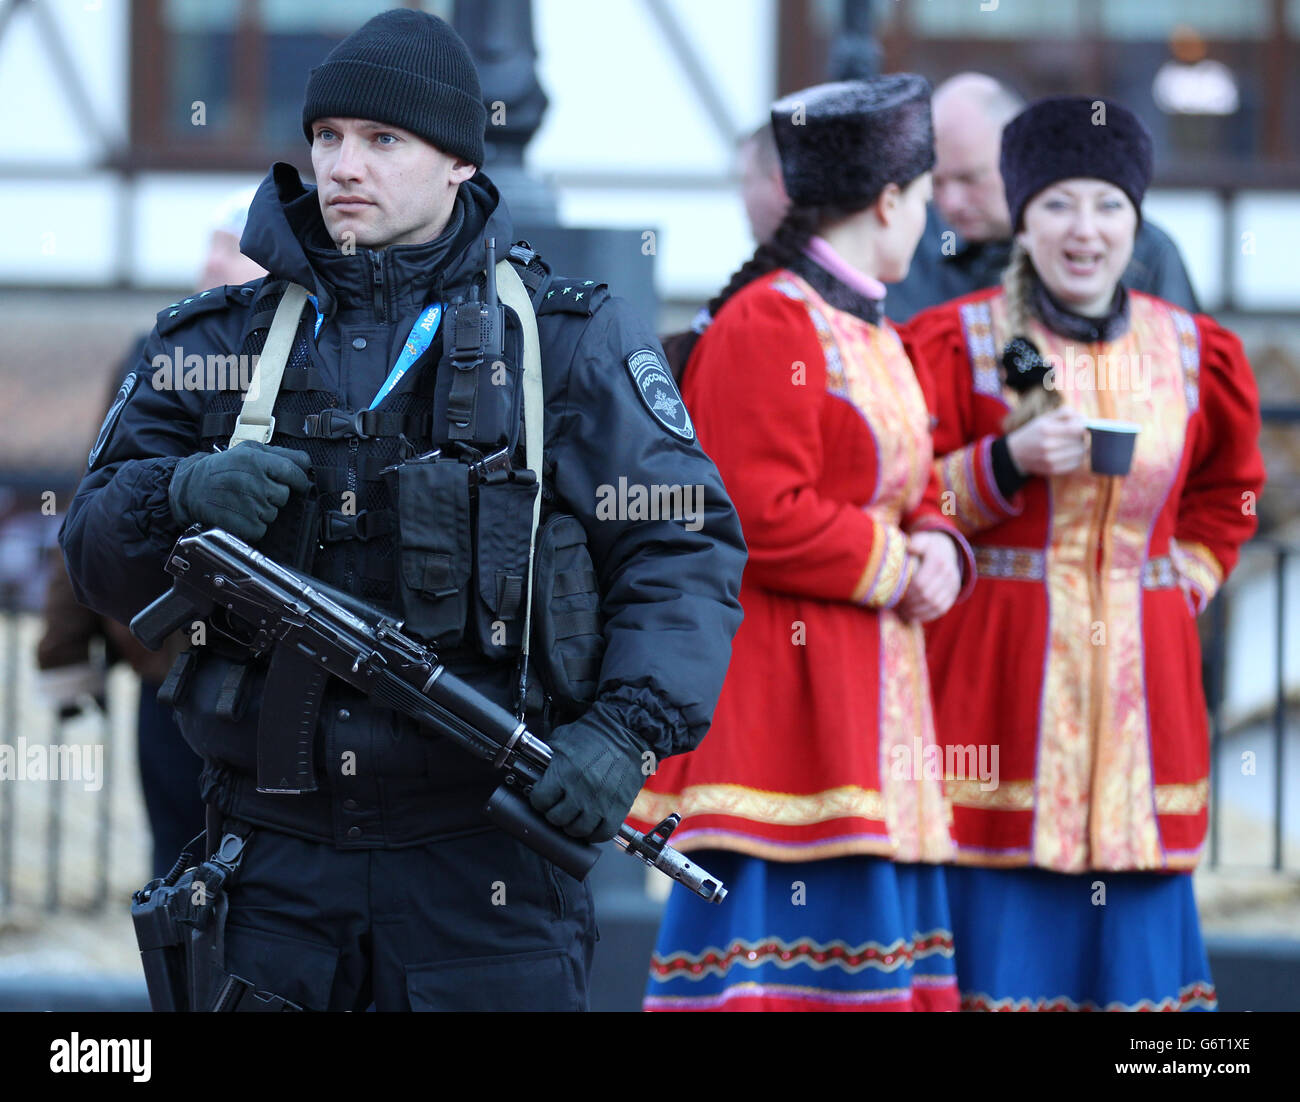 Sochi Winter Olympic Games - Pre-Games activity - Wednesday. Security as The Olympic flame is carried through Rosa Khutor ahead of the start of 2014 Winter Games in Sochi. Stock Photo